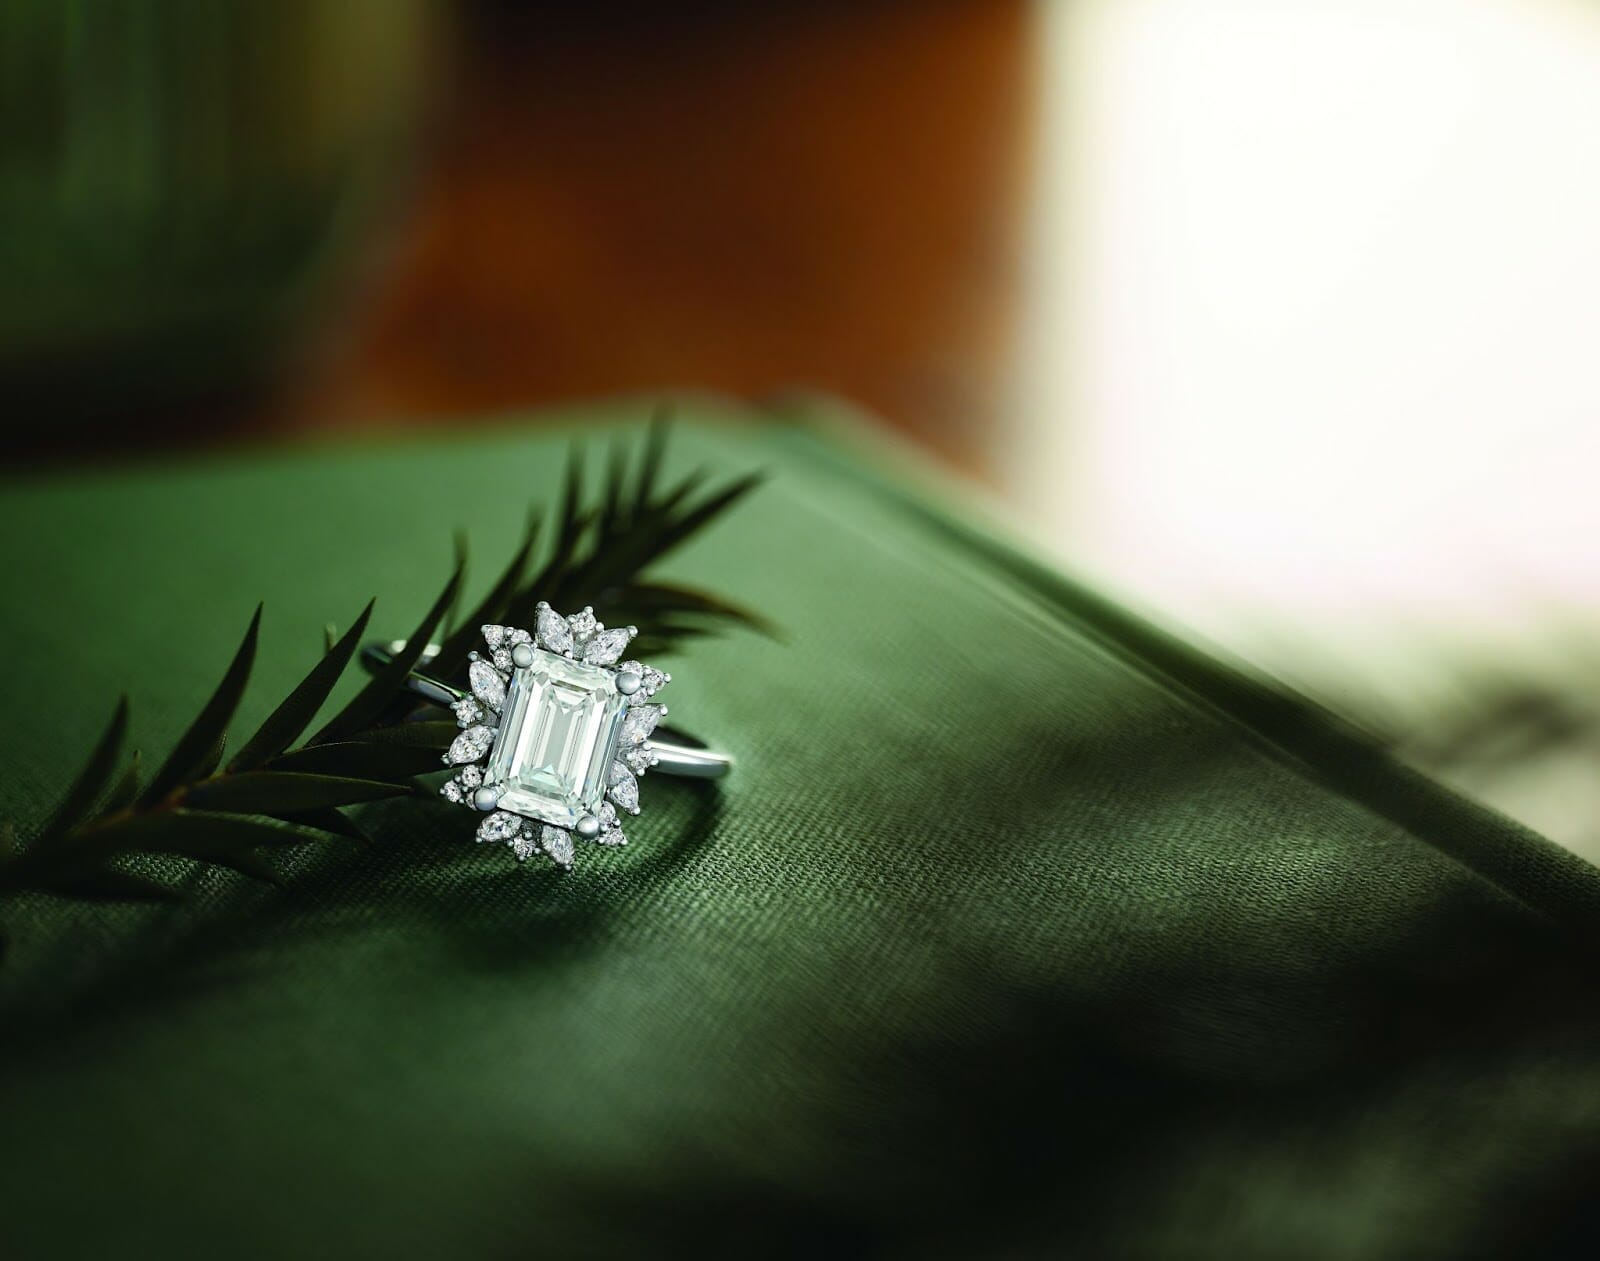 A stunning ADX holiday jewellery gift diamond ring on a green holiday themed surface.